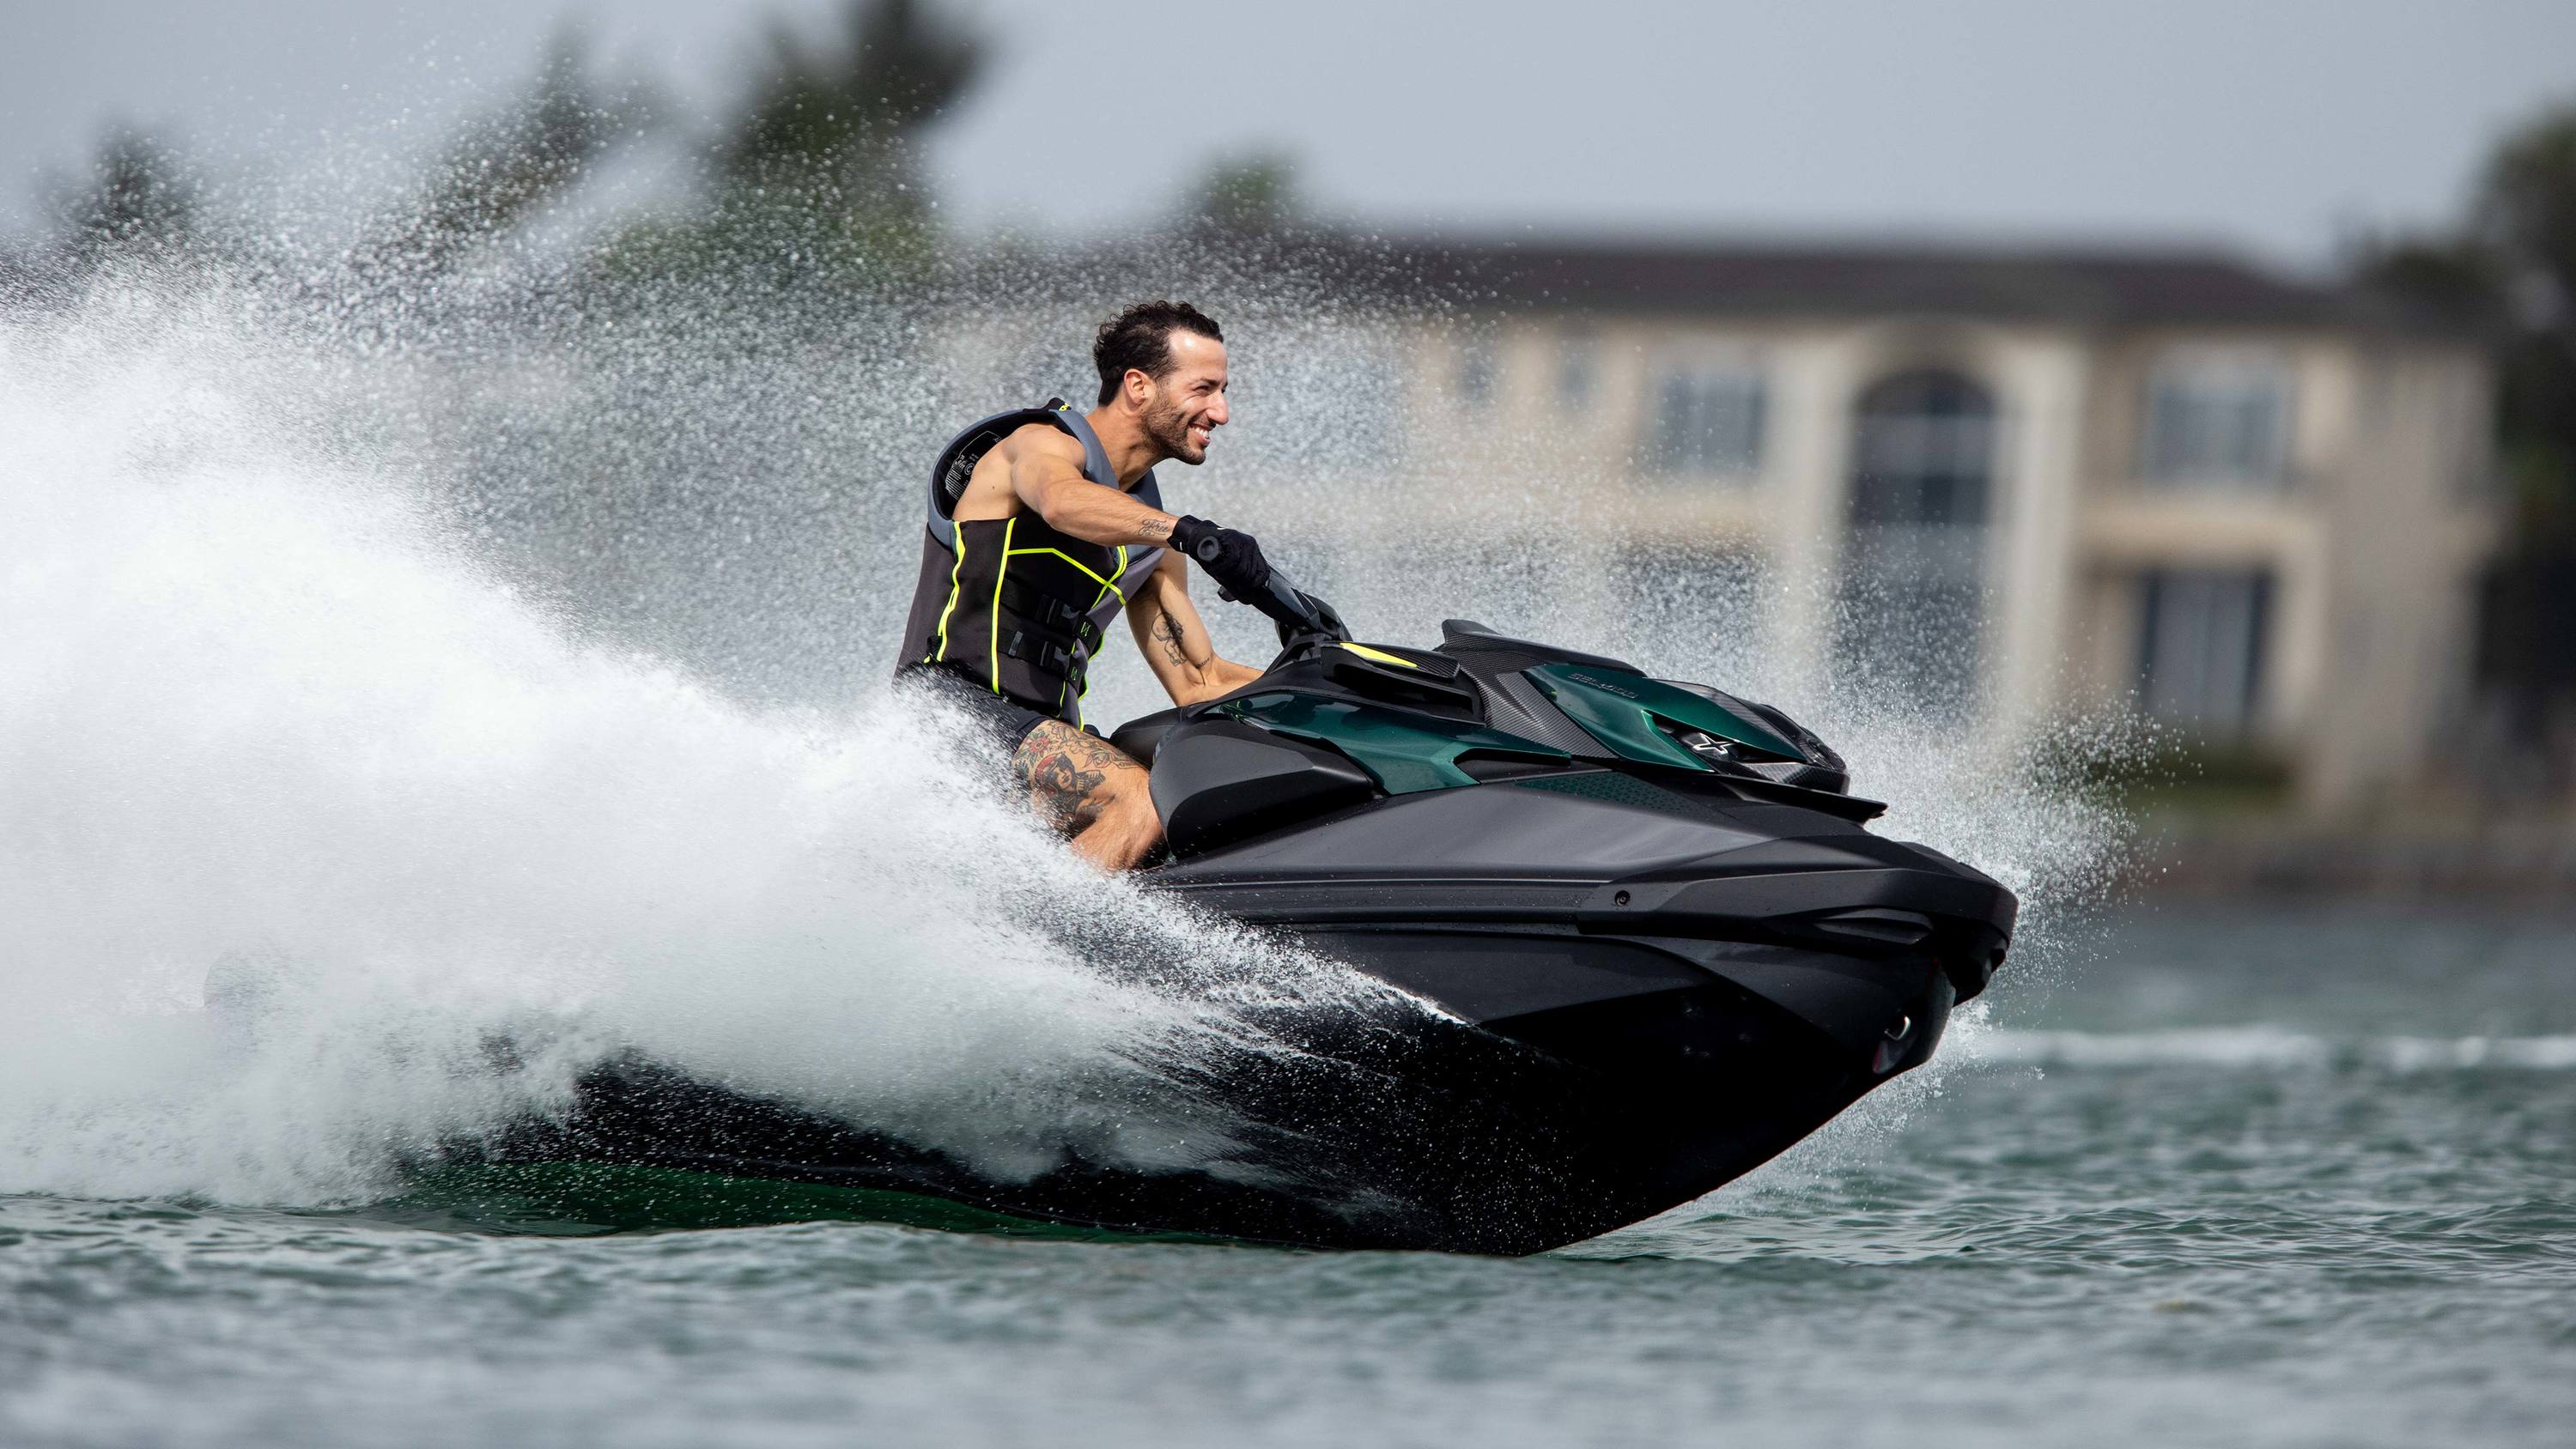 https://www.vmsholland.com/fckimages/pages/sea-doo-switch/sea-my23-perf-rxp-x-apex-300-racinggreen-lifestyle-danielricday2-31-rgb-16x9.jpeg